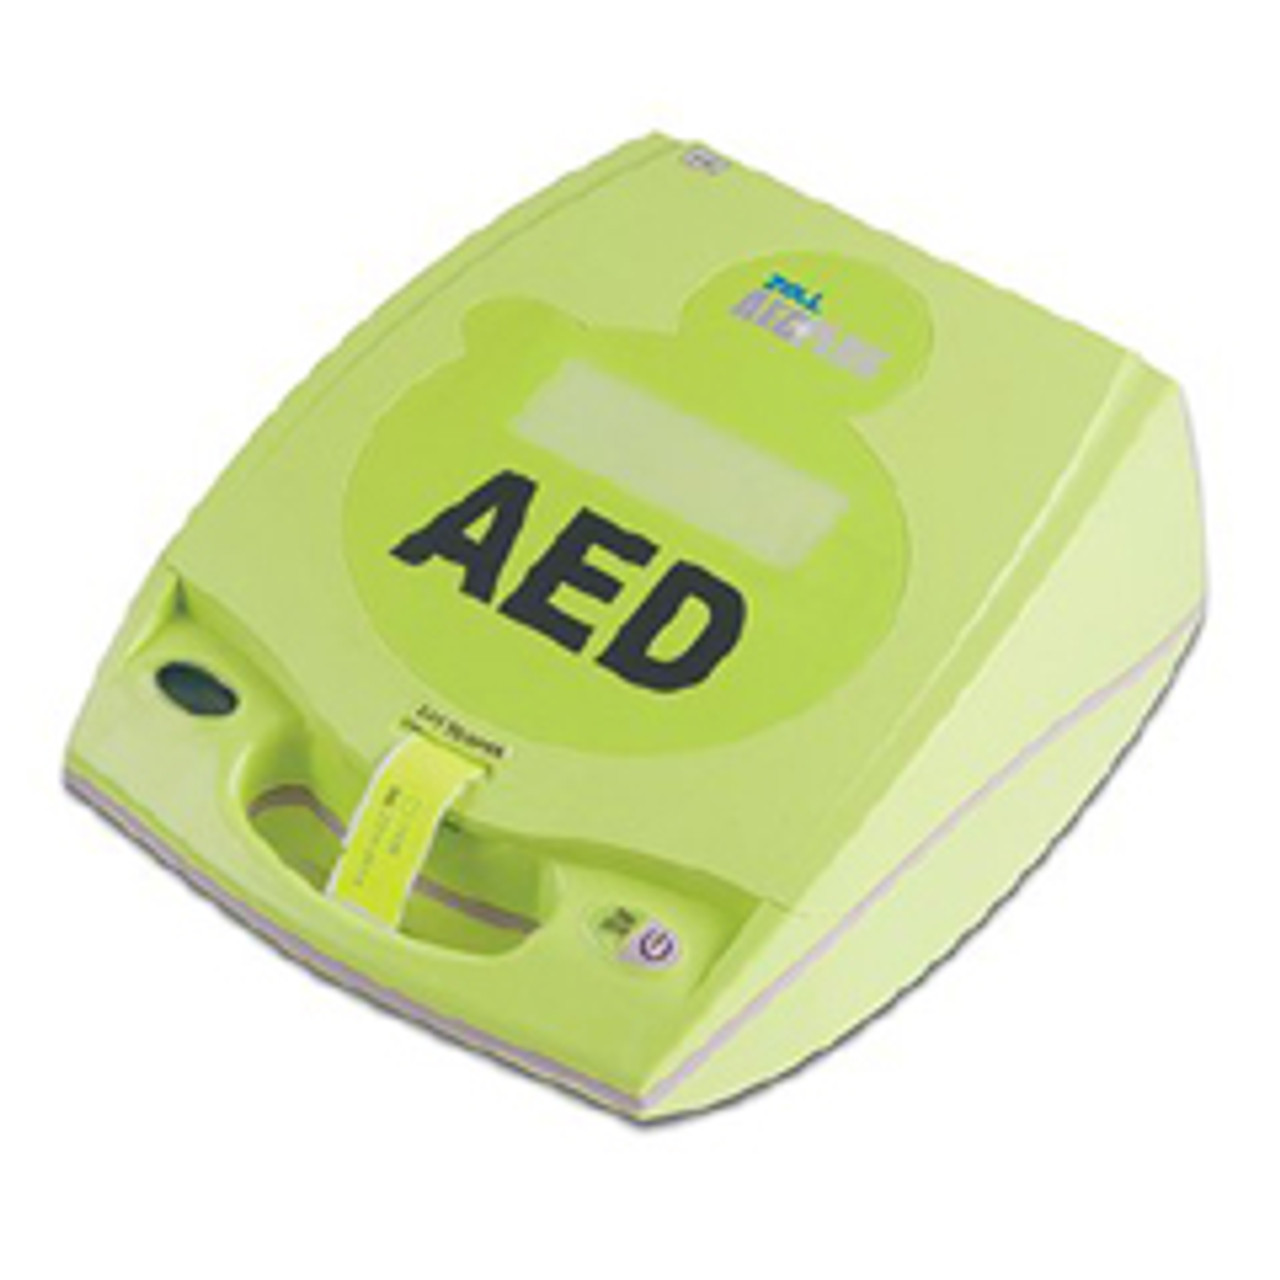 Zoll AED PLUS Defibrillator & Accessory, PS Series, ECG ON, w/ PA CVR, LCD, No Voice Recording, PlusRX, DMST